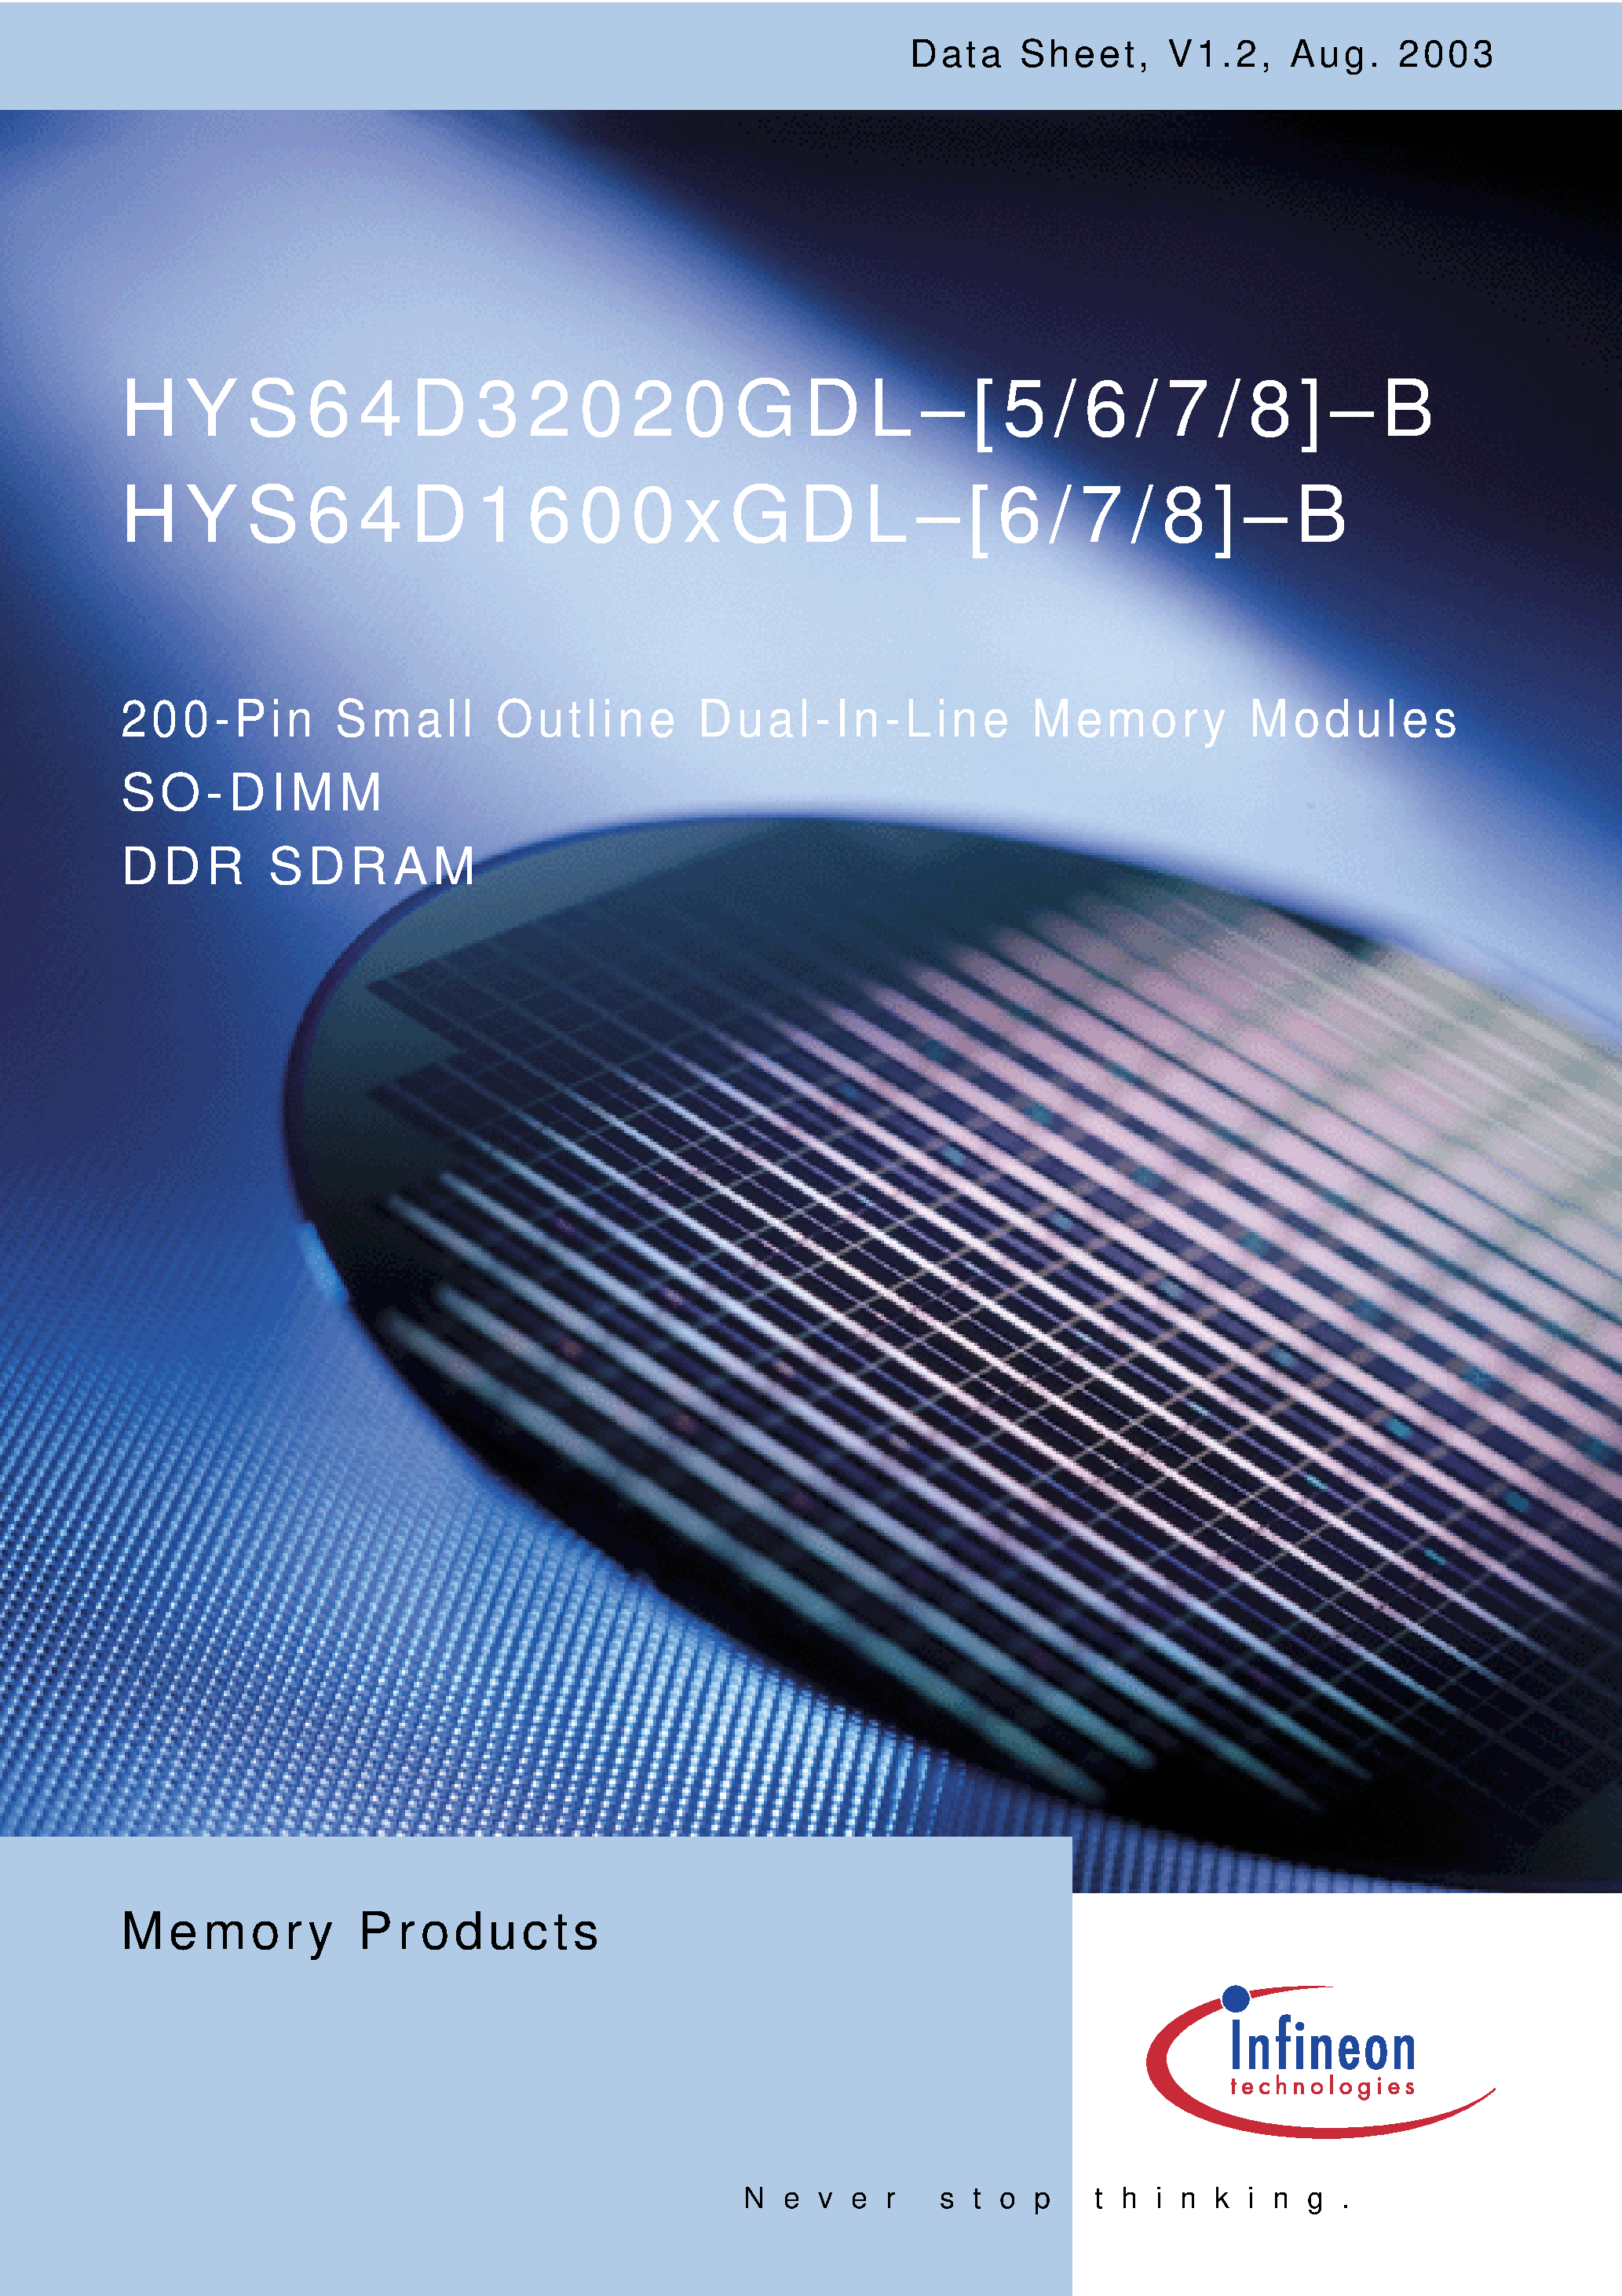 Datasheet HYS64D16001GDL-6-B - 200-Pin Small Outline Dual-In-Line Memory Modules page 1